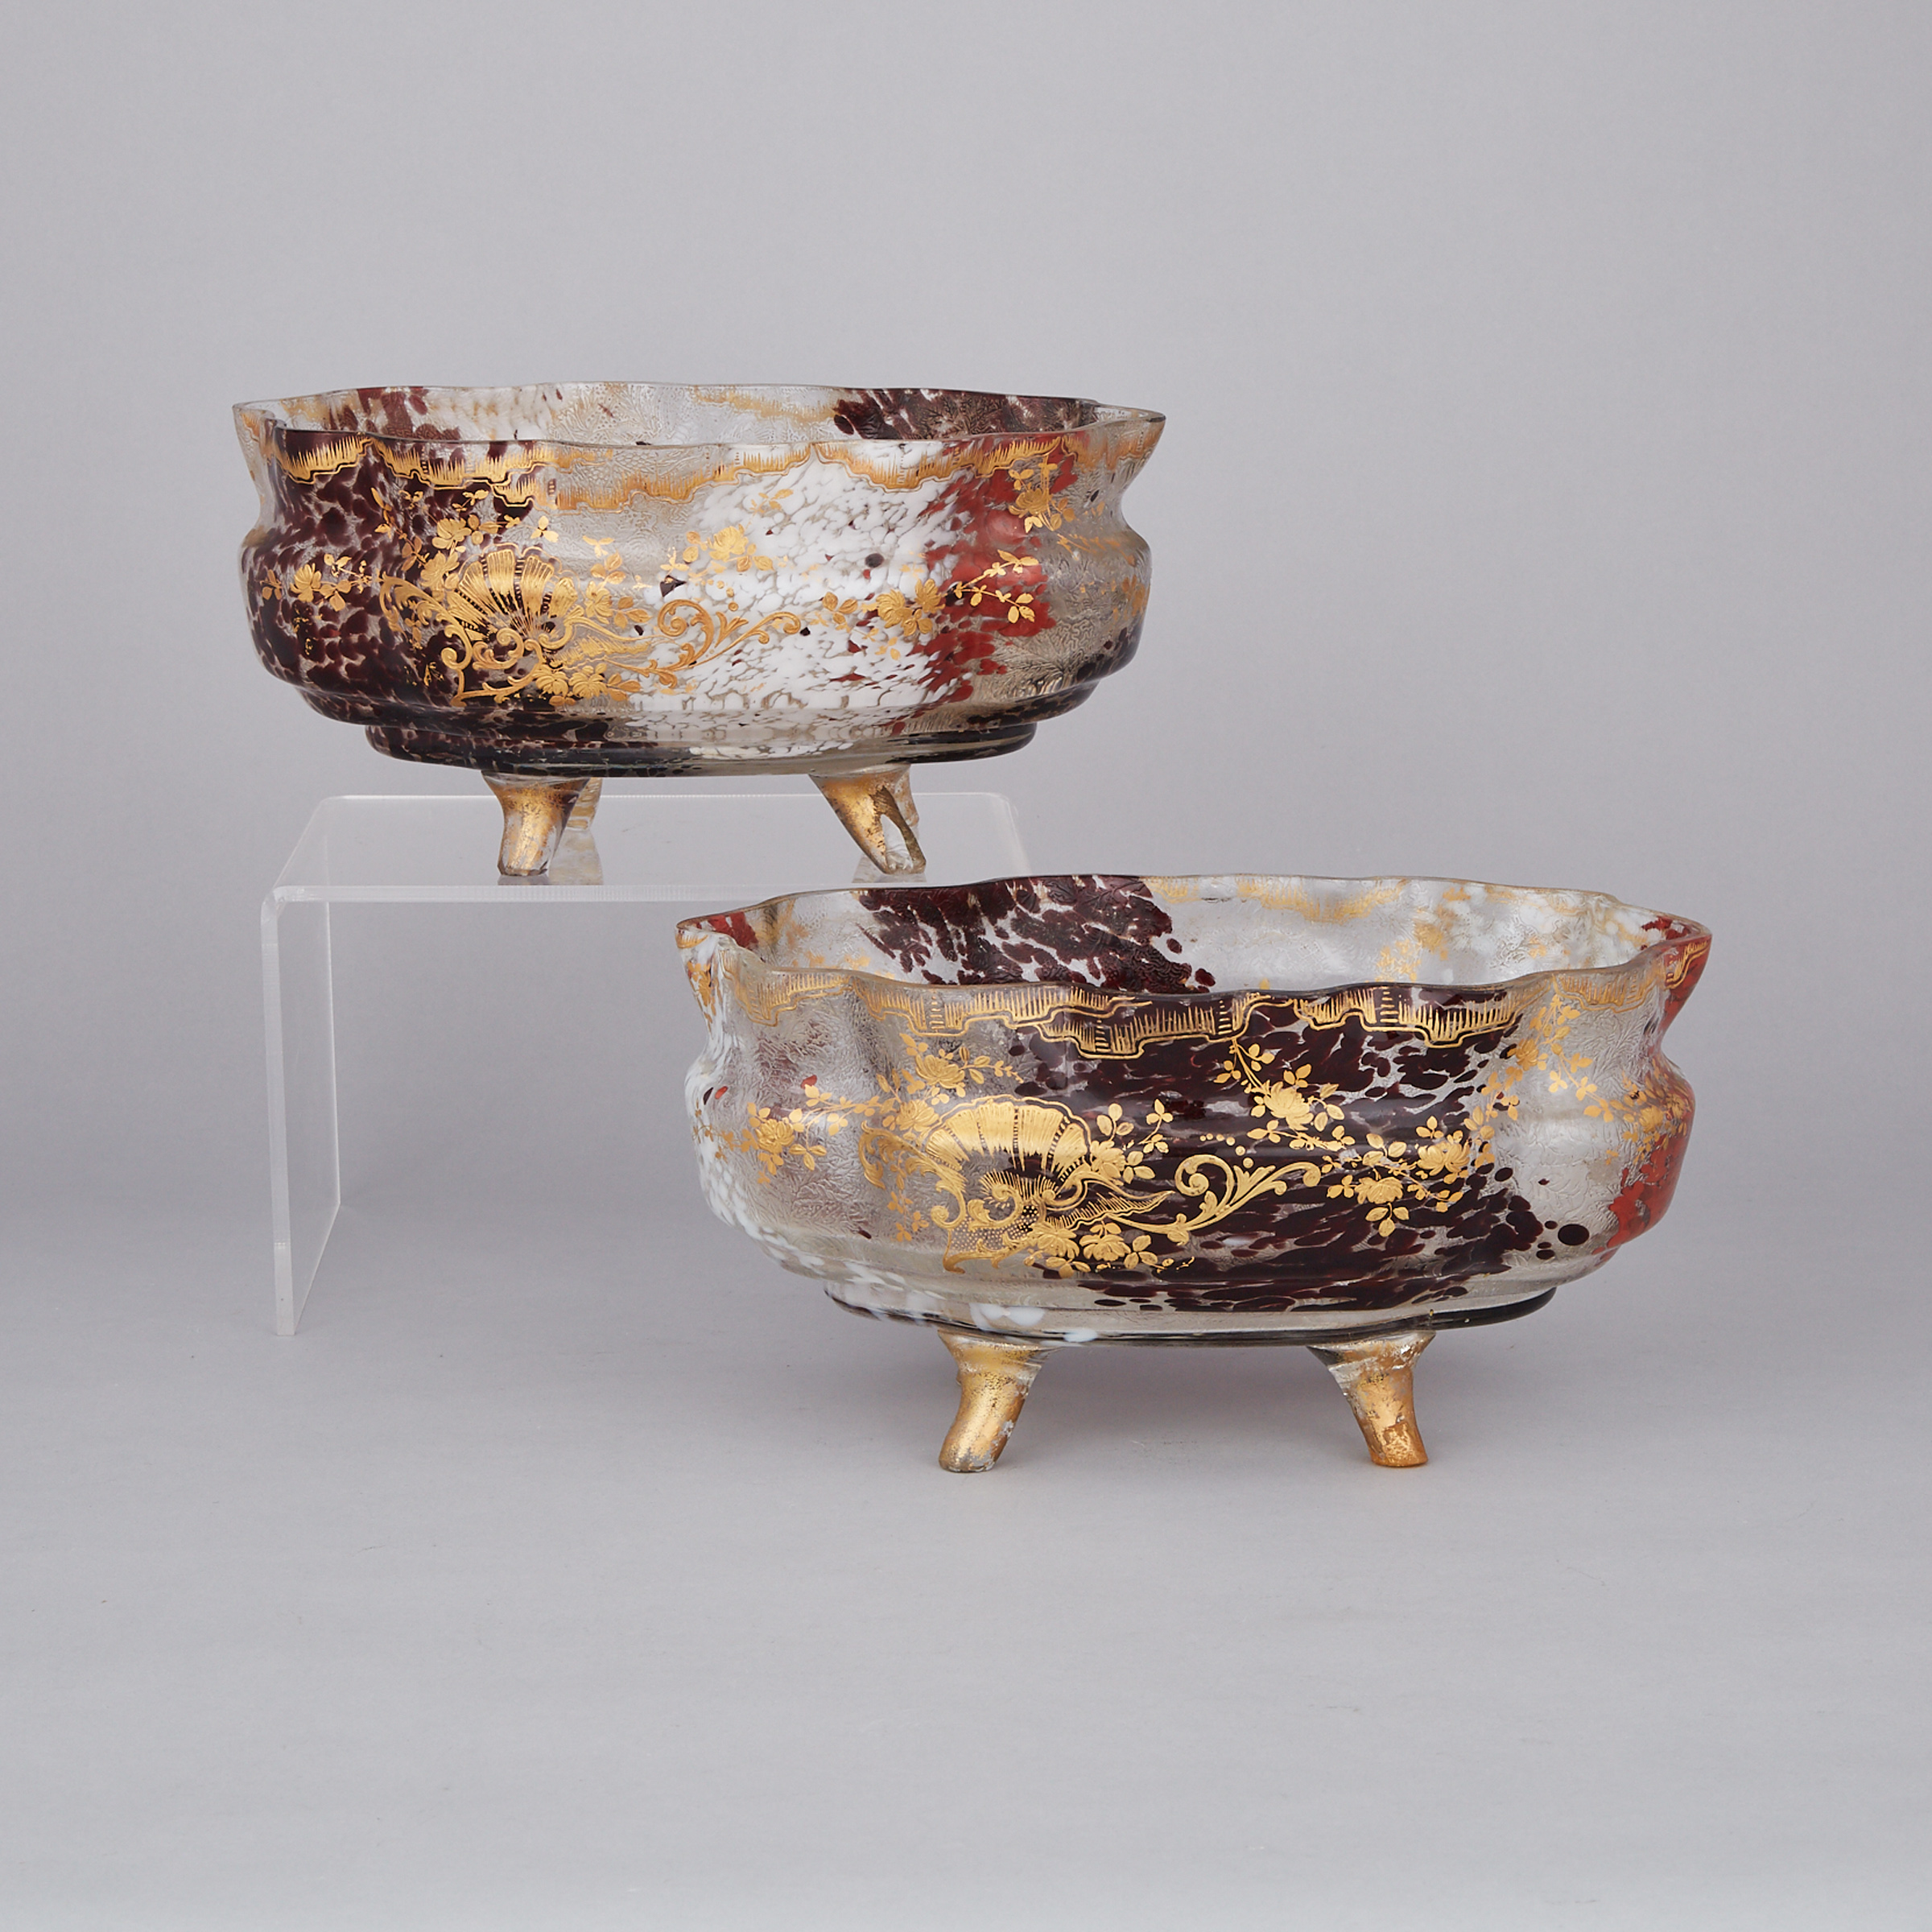 Pair of French Moulded and Gilt Tortoiseshell Glass Oval Centrepiece Bowls, c.1900